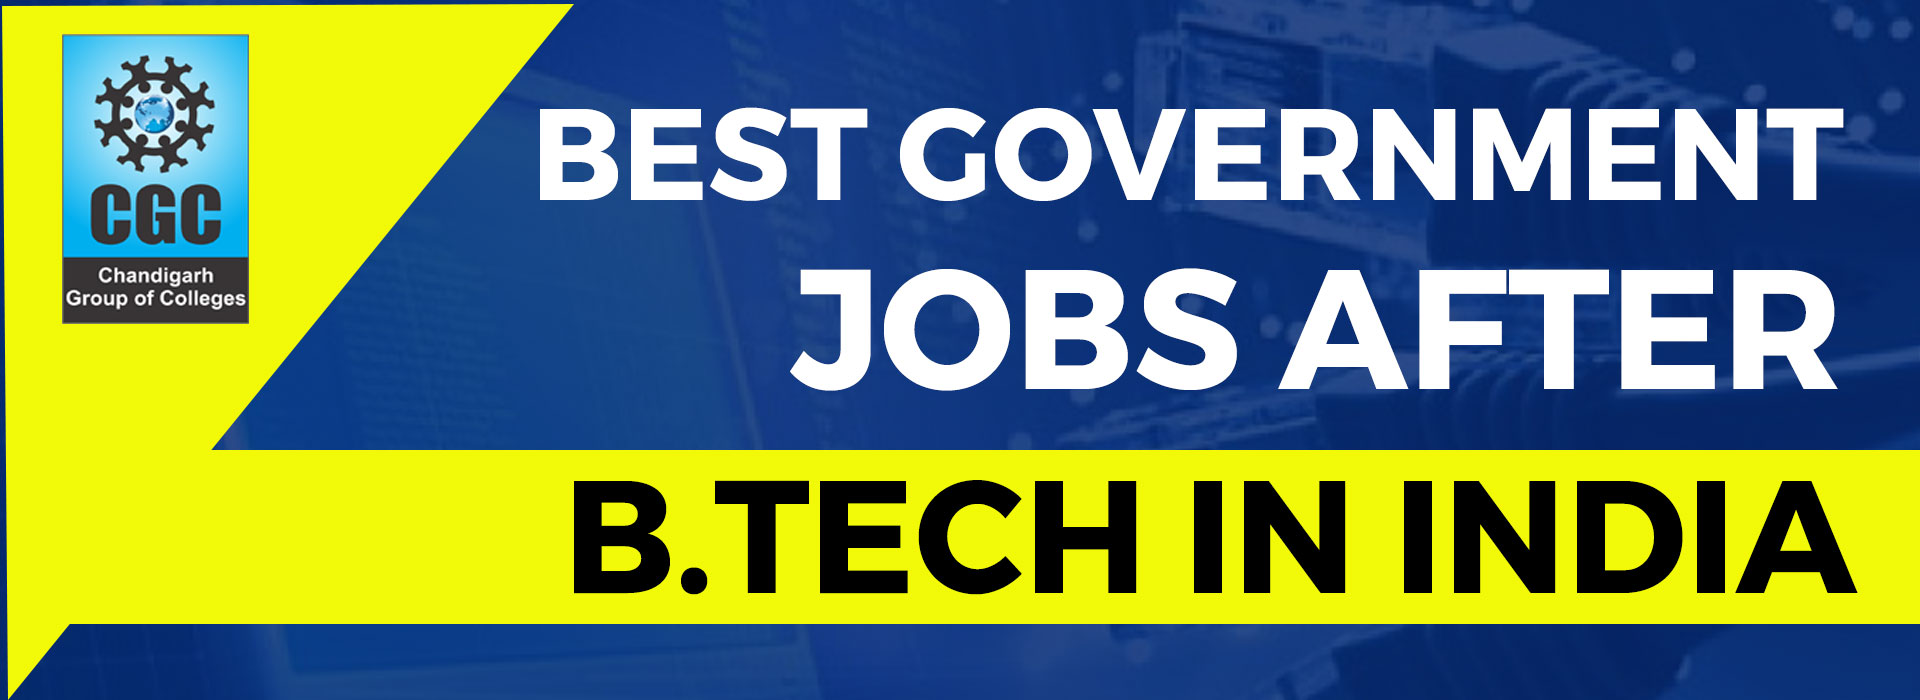 Best Government Jobs after B.Tech in India 